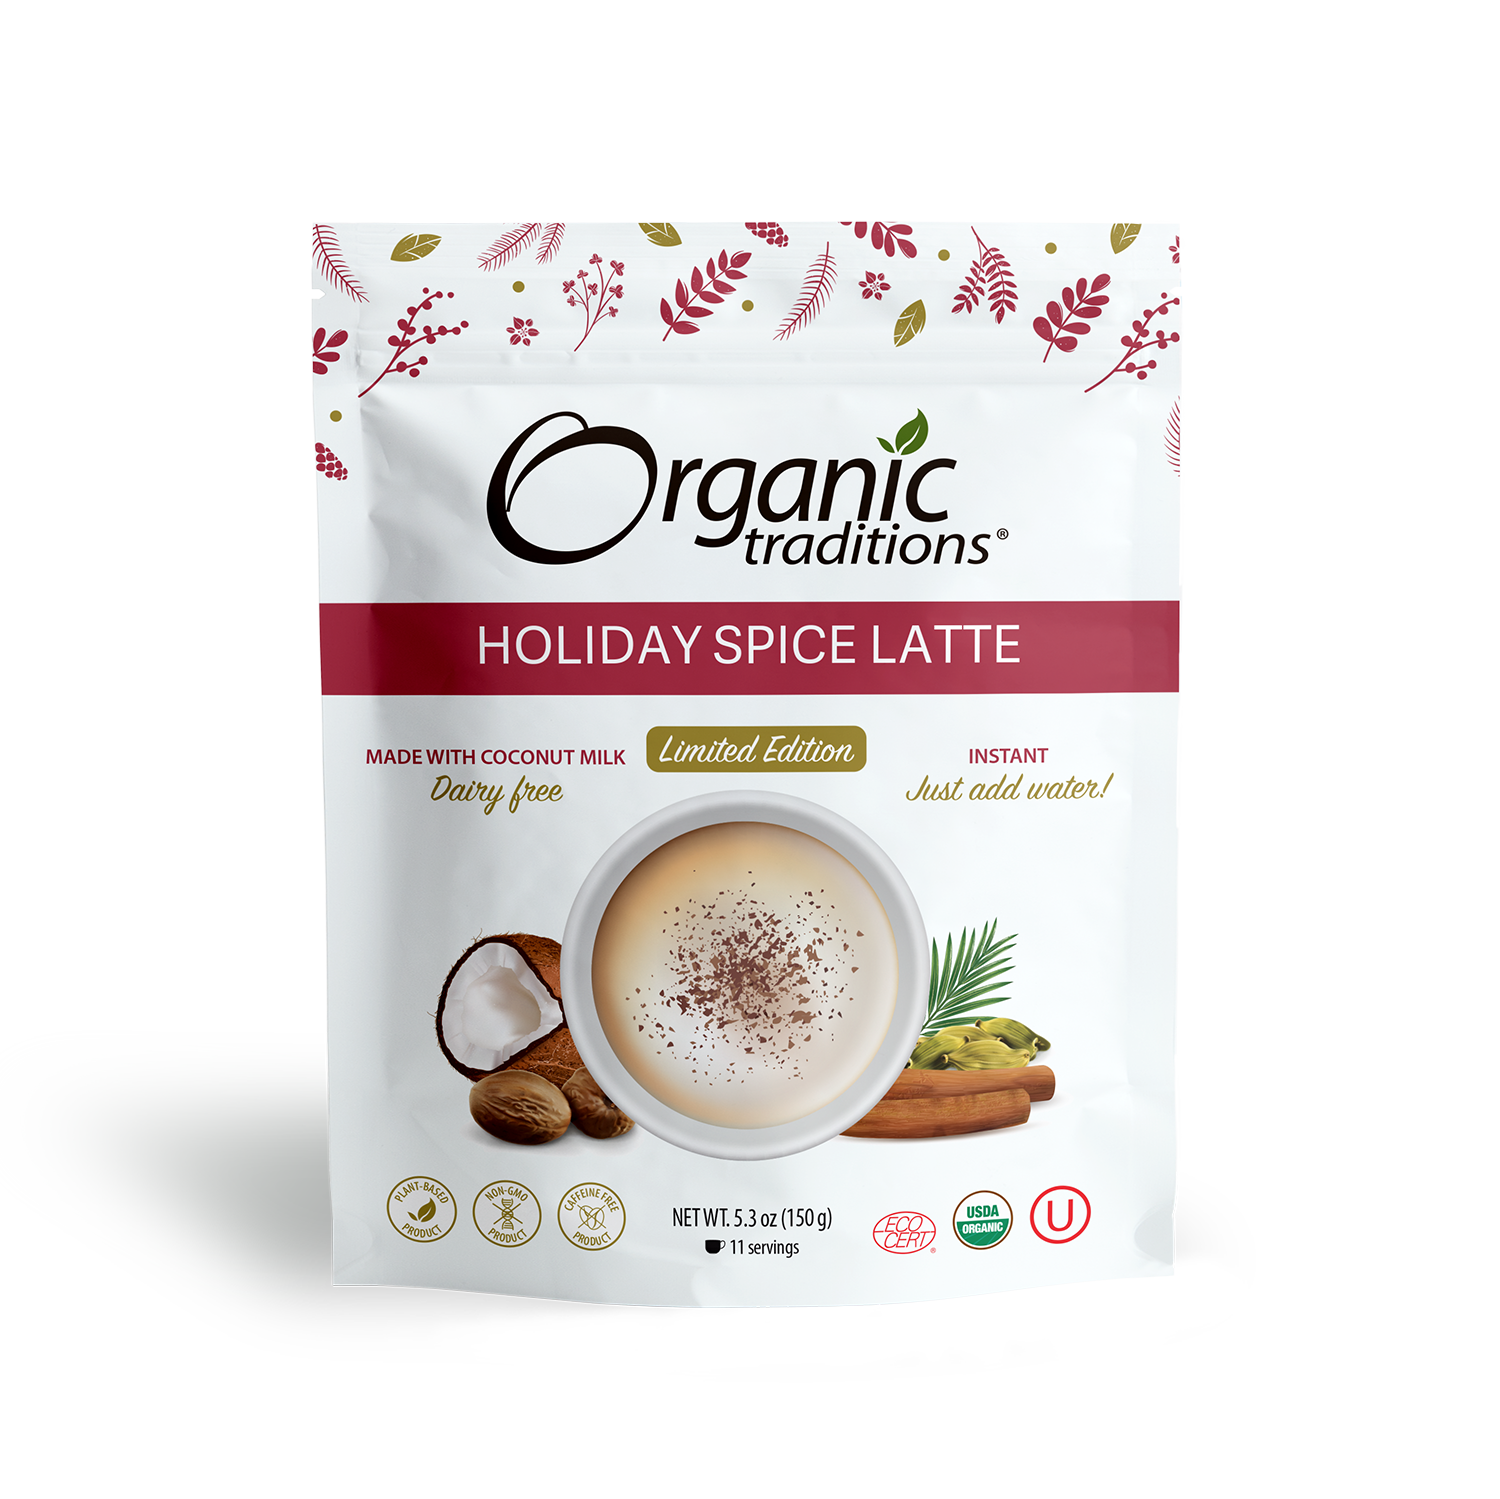 organic traditions holiday spice latte front of bag image